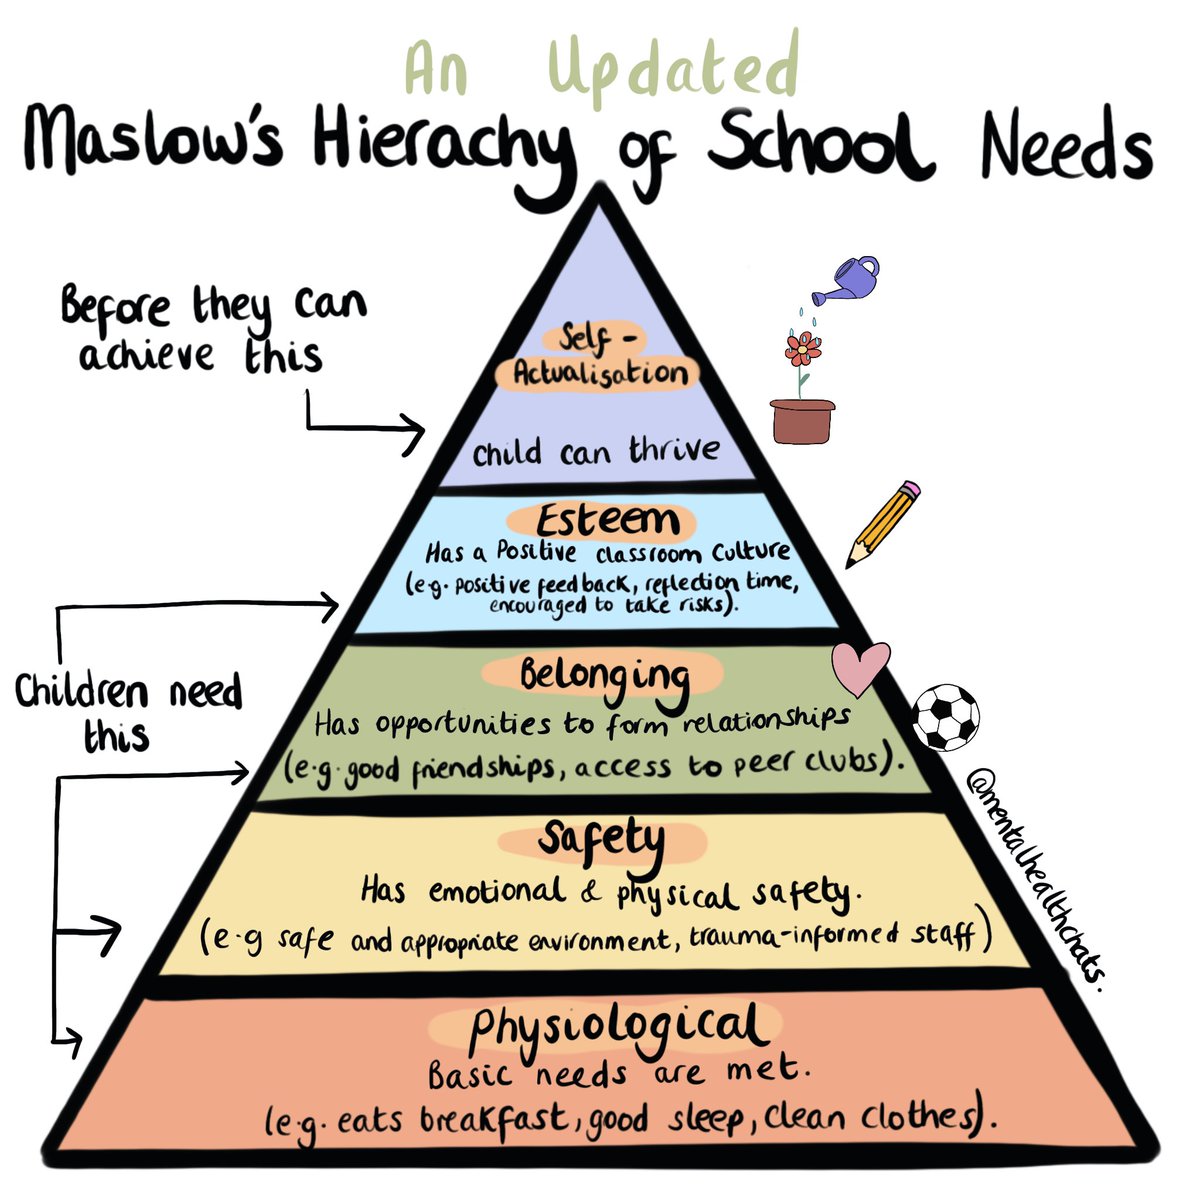 Finally updated my Maslow’s hierarchy of school needs drawing from last summer. Children need their basic needs met, feel safe and have opportunity to form relationships before they are able to thrive. Looking forward to sharing with schools in September 😁